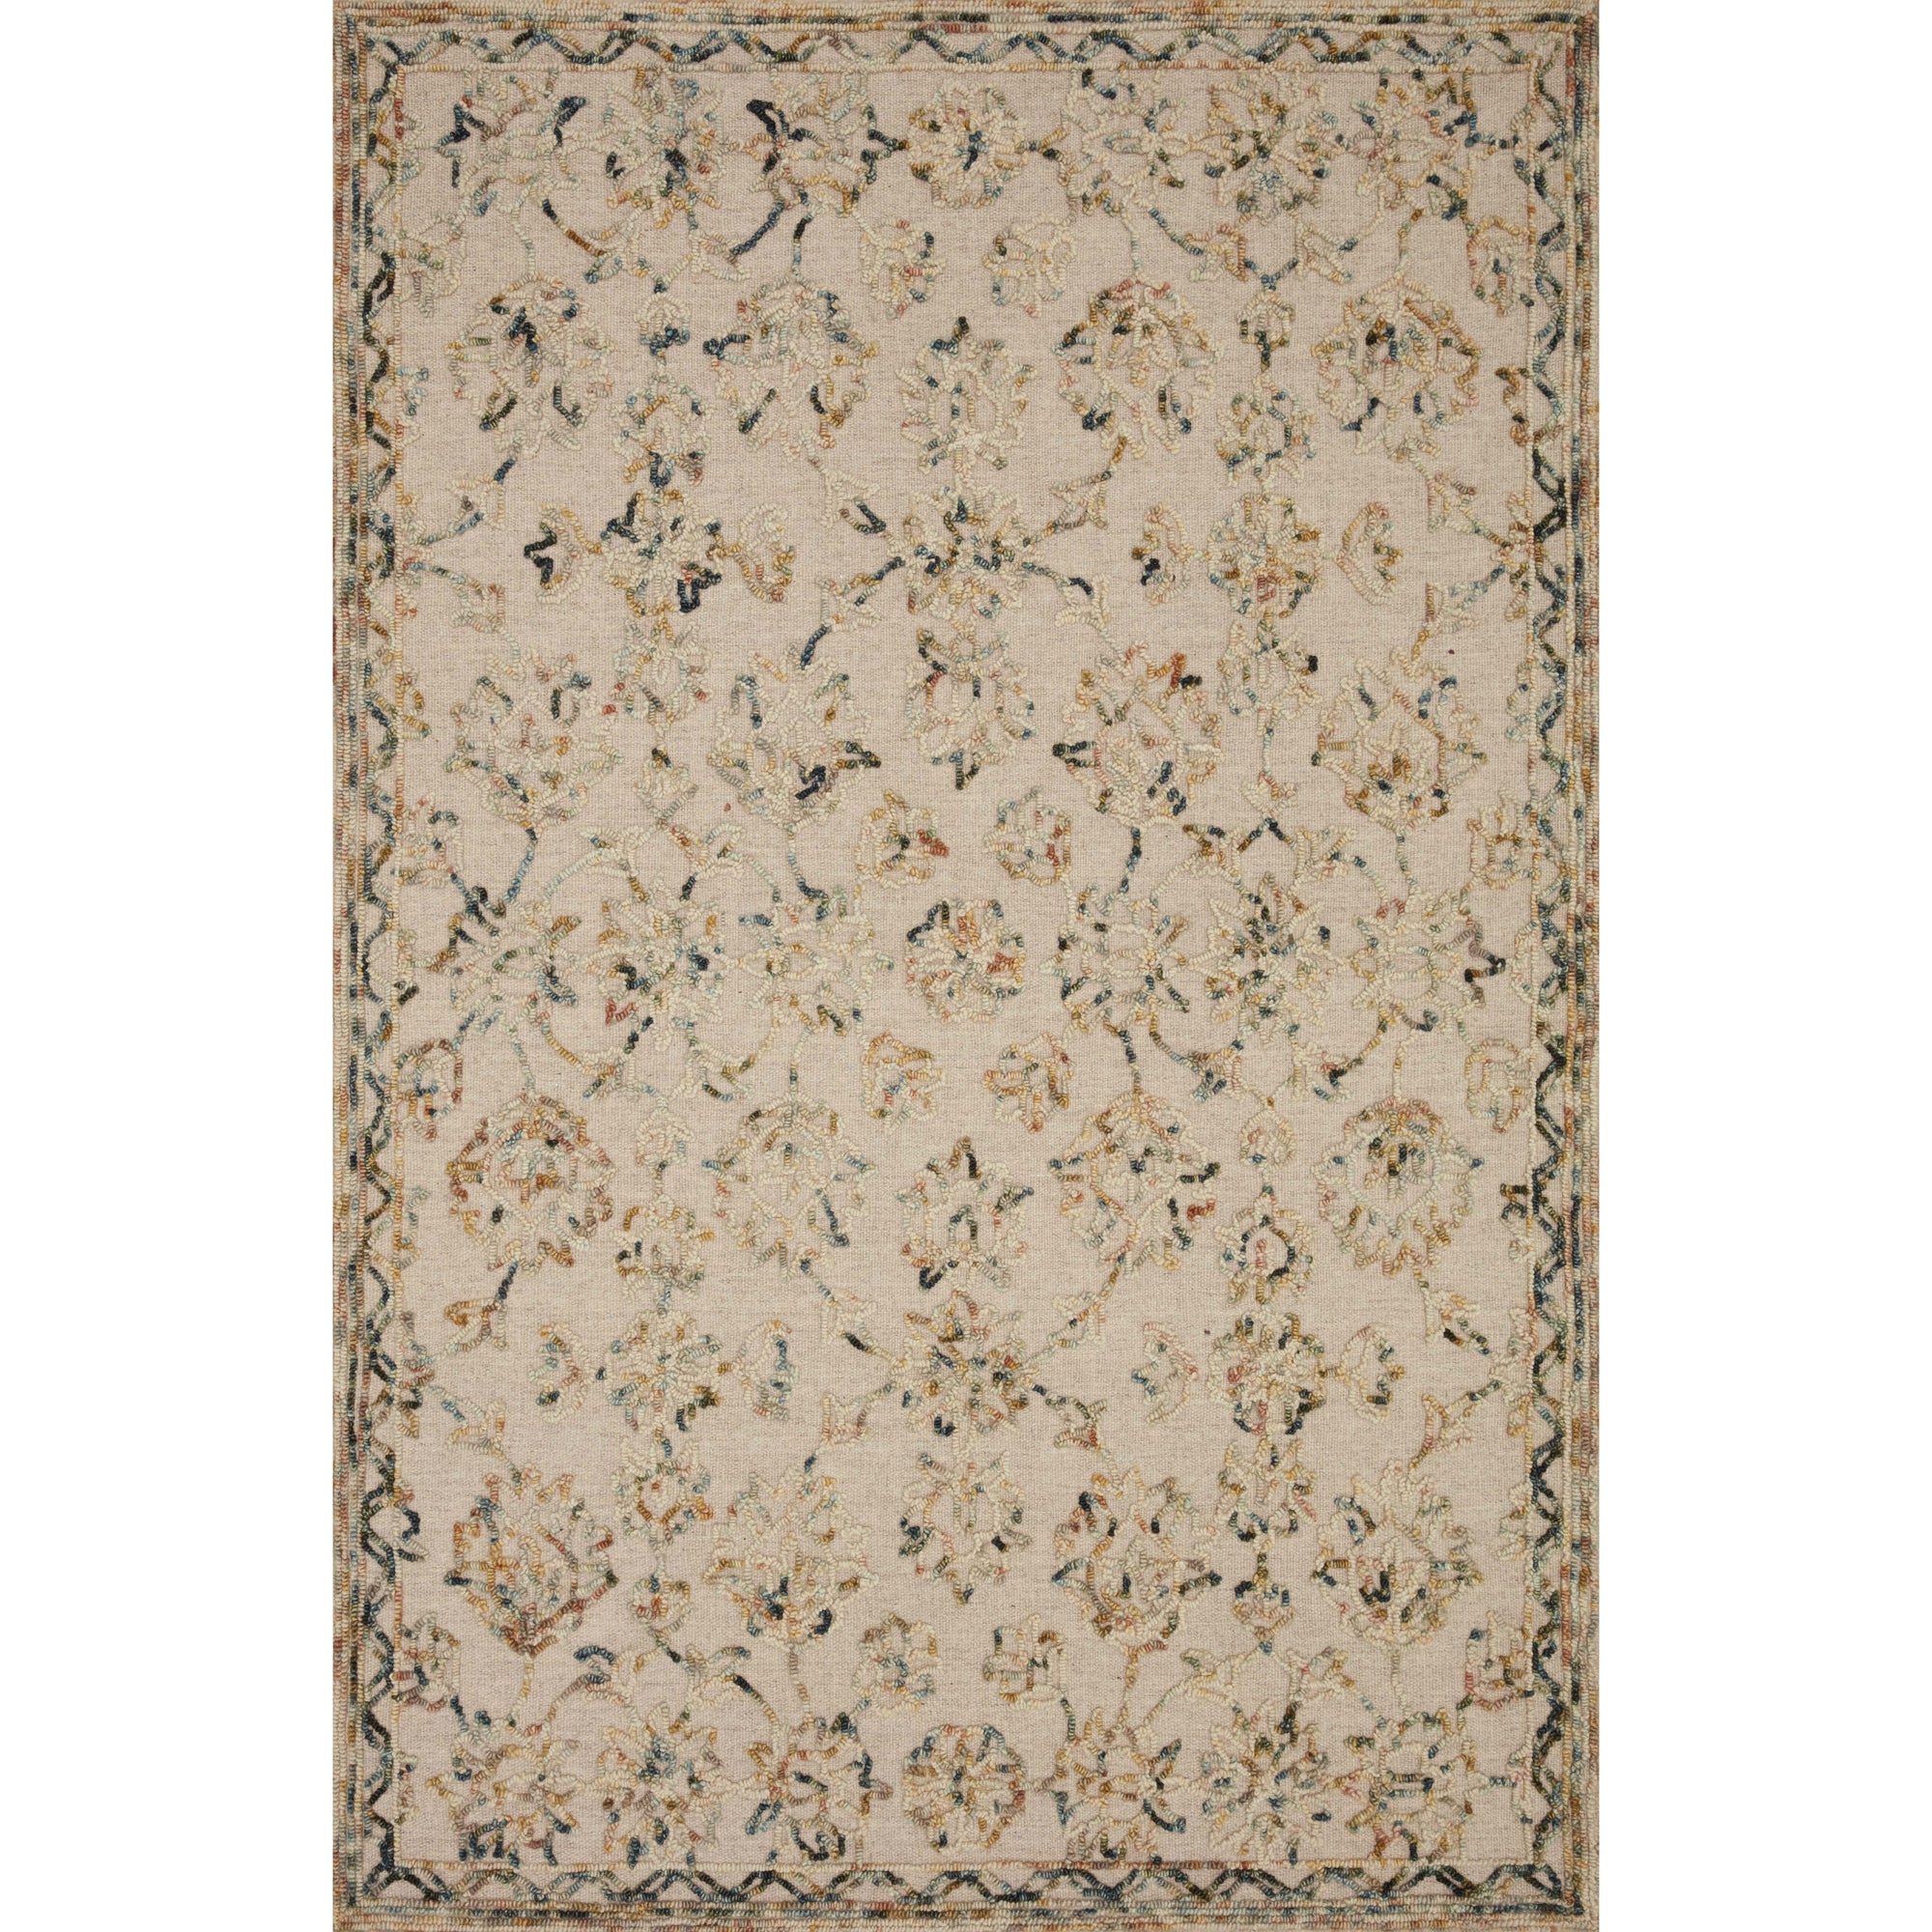 Rugs by Roo Loloi Halle Lagoon Multi Area Rug in size 18" x 18" Sample